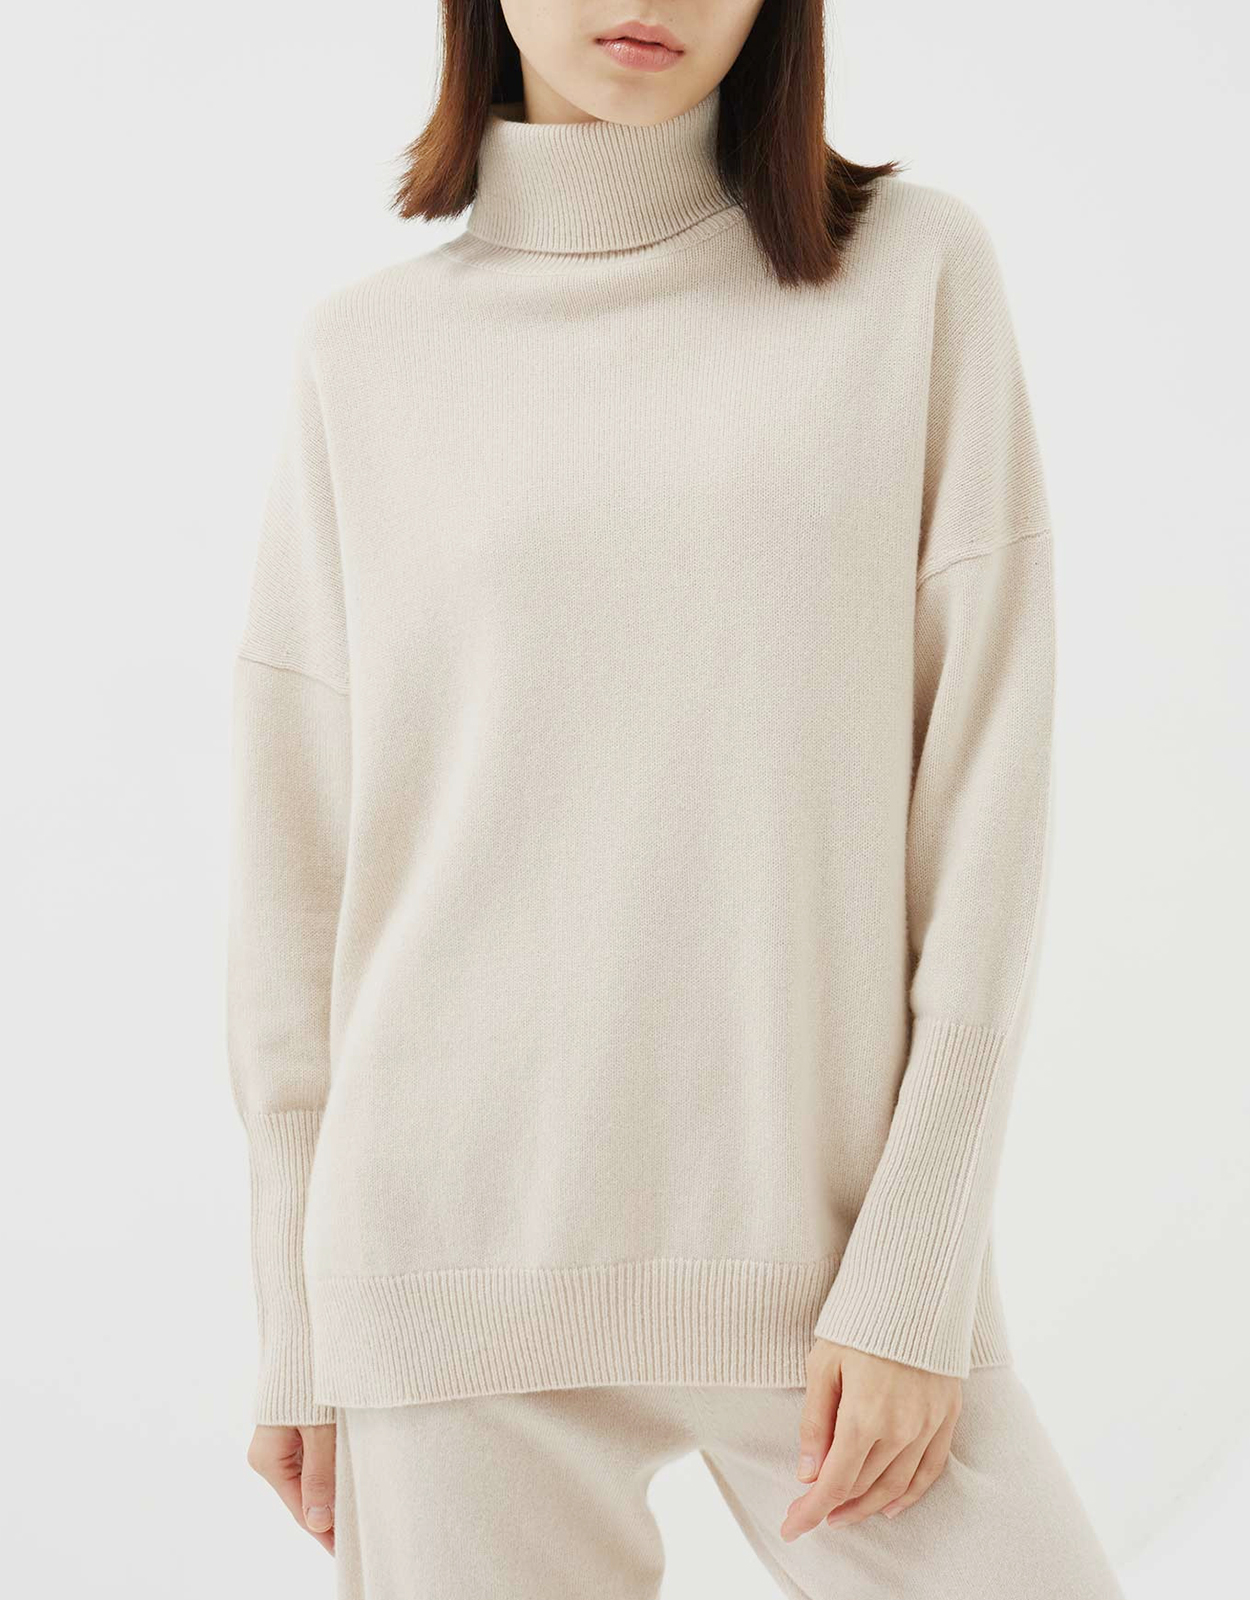 Chinti & Parker Contrast Rollneck Sweater